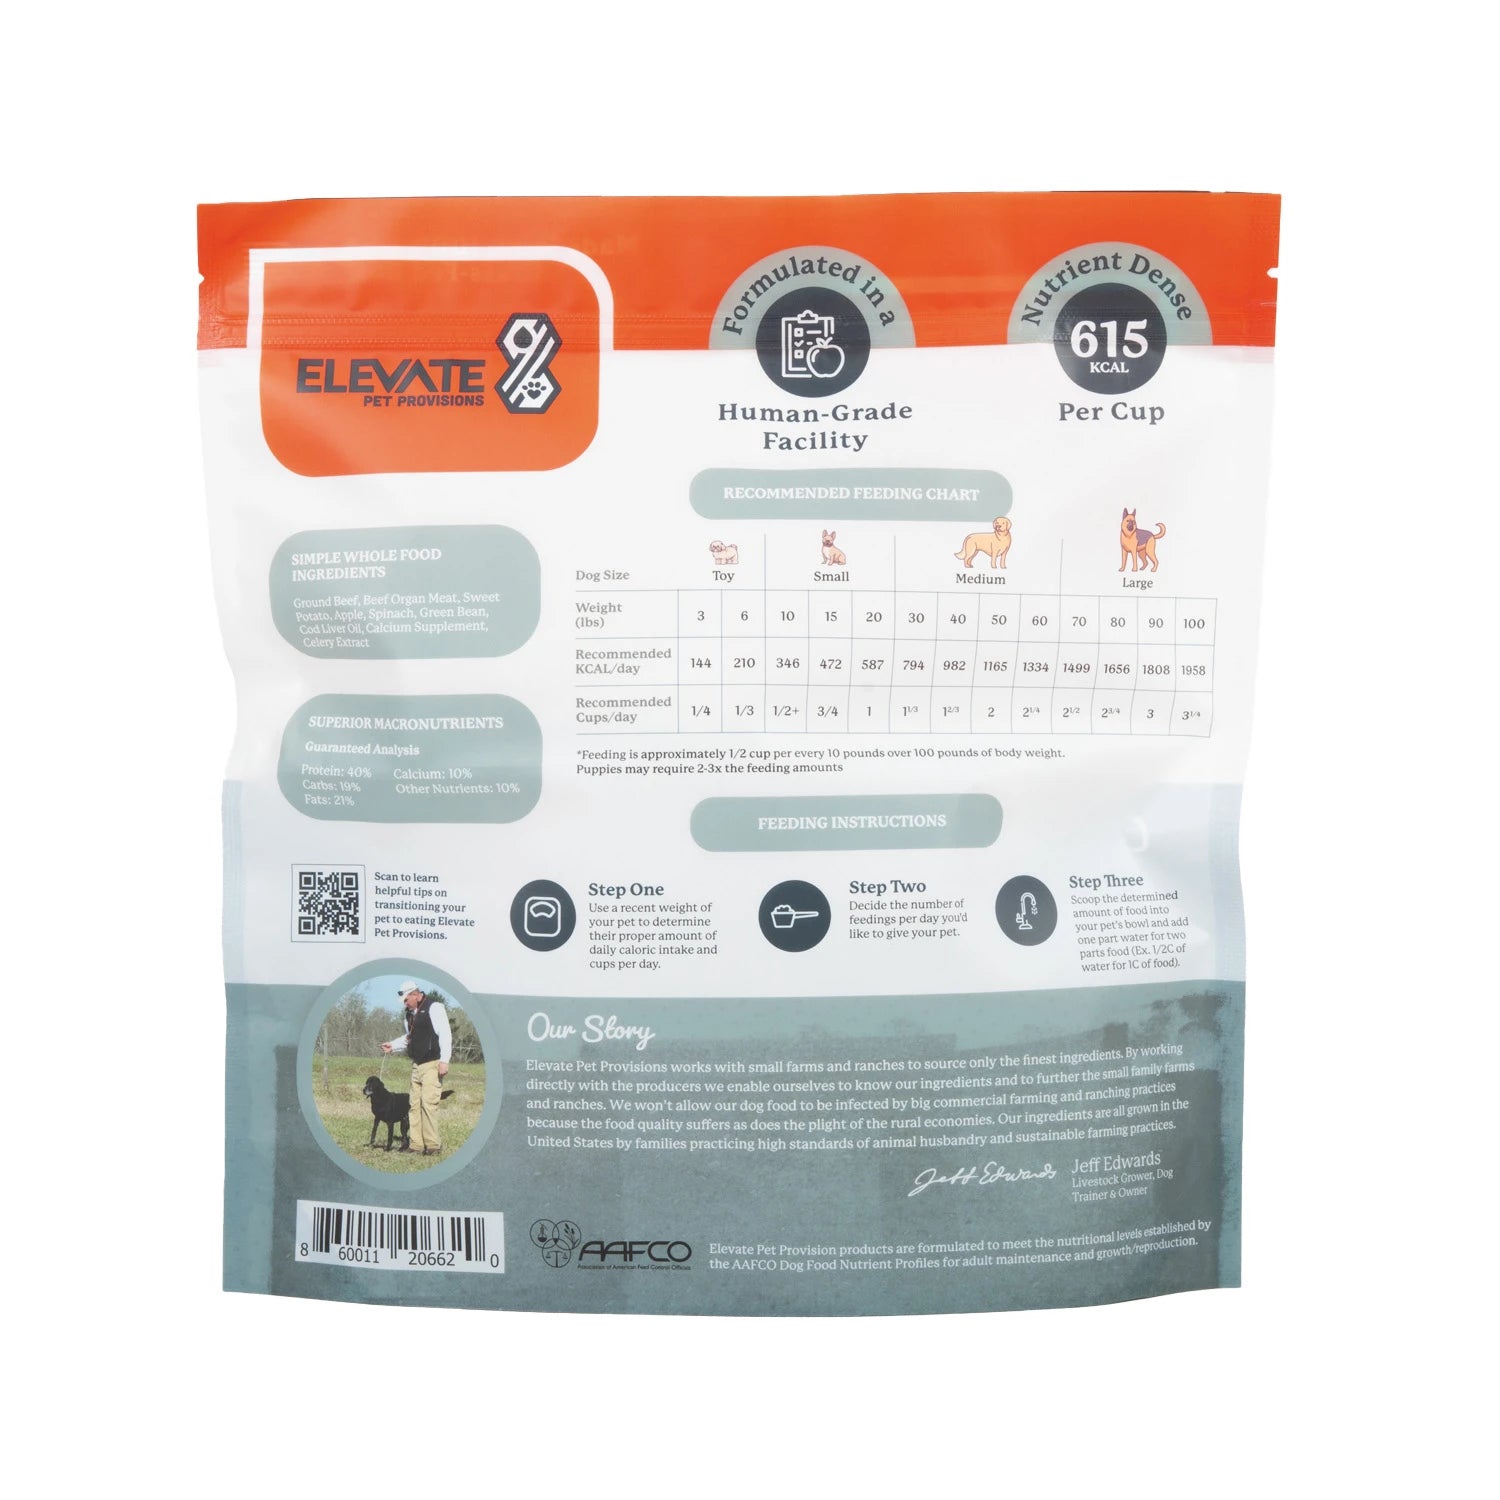 Elevate Pet Provisions - Formulated in a human-grade facility - nutrient dense 615KCAL per cup